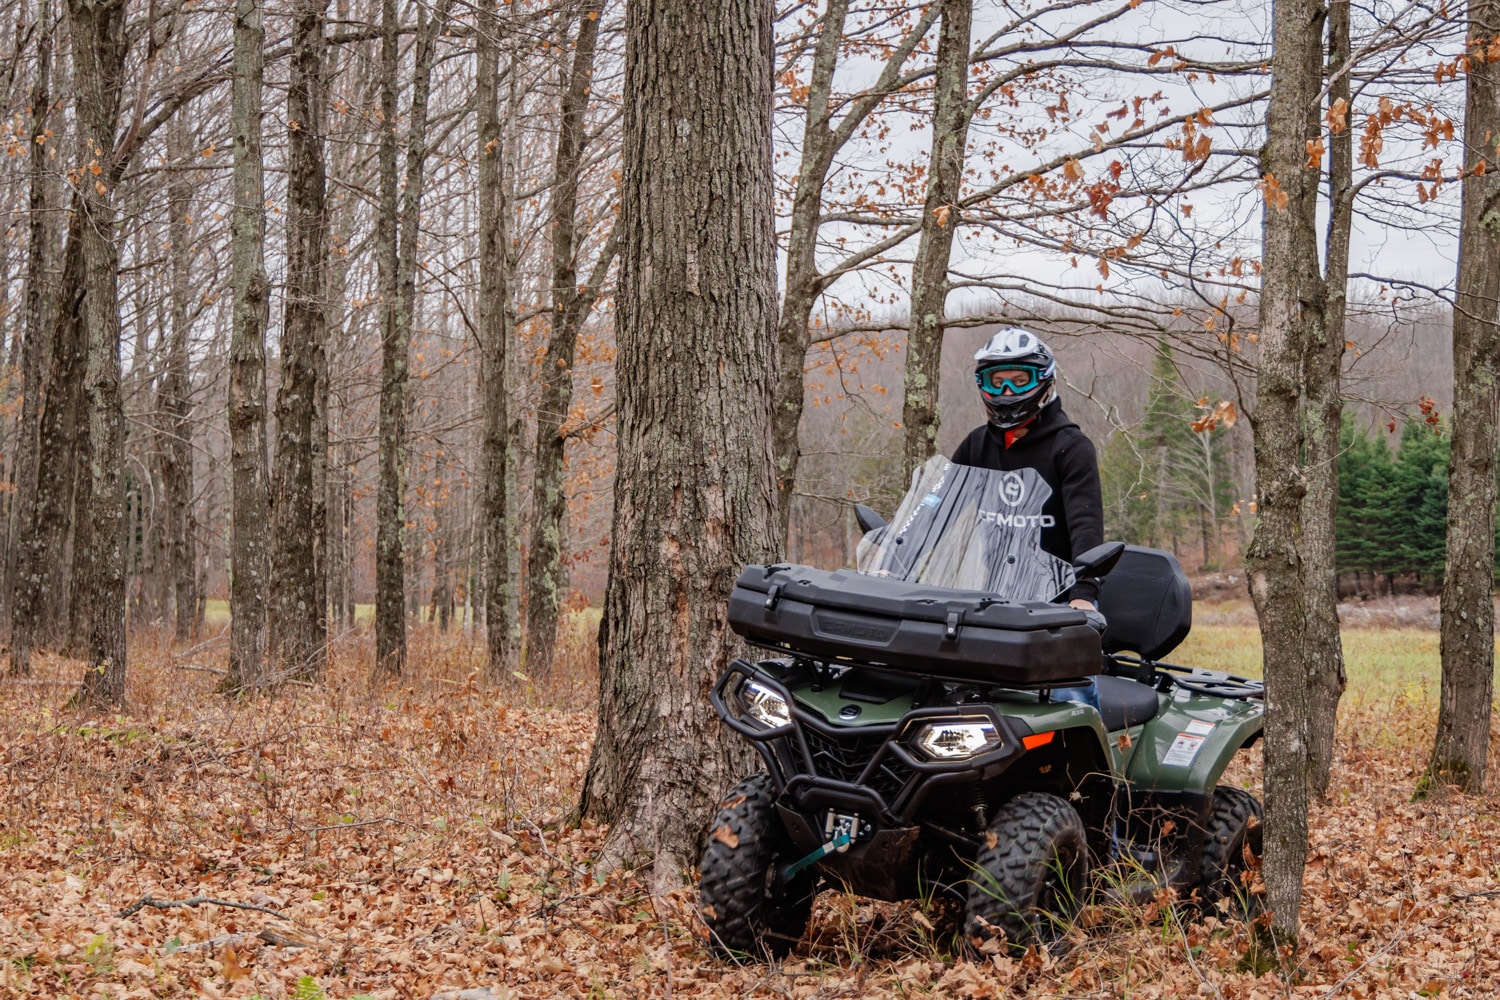 GET-ON-THE-TRAILS-WITH-THE-CFMOTO-2023-CFORCE-400-HO-EPS-ATV